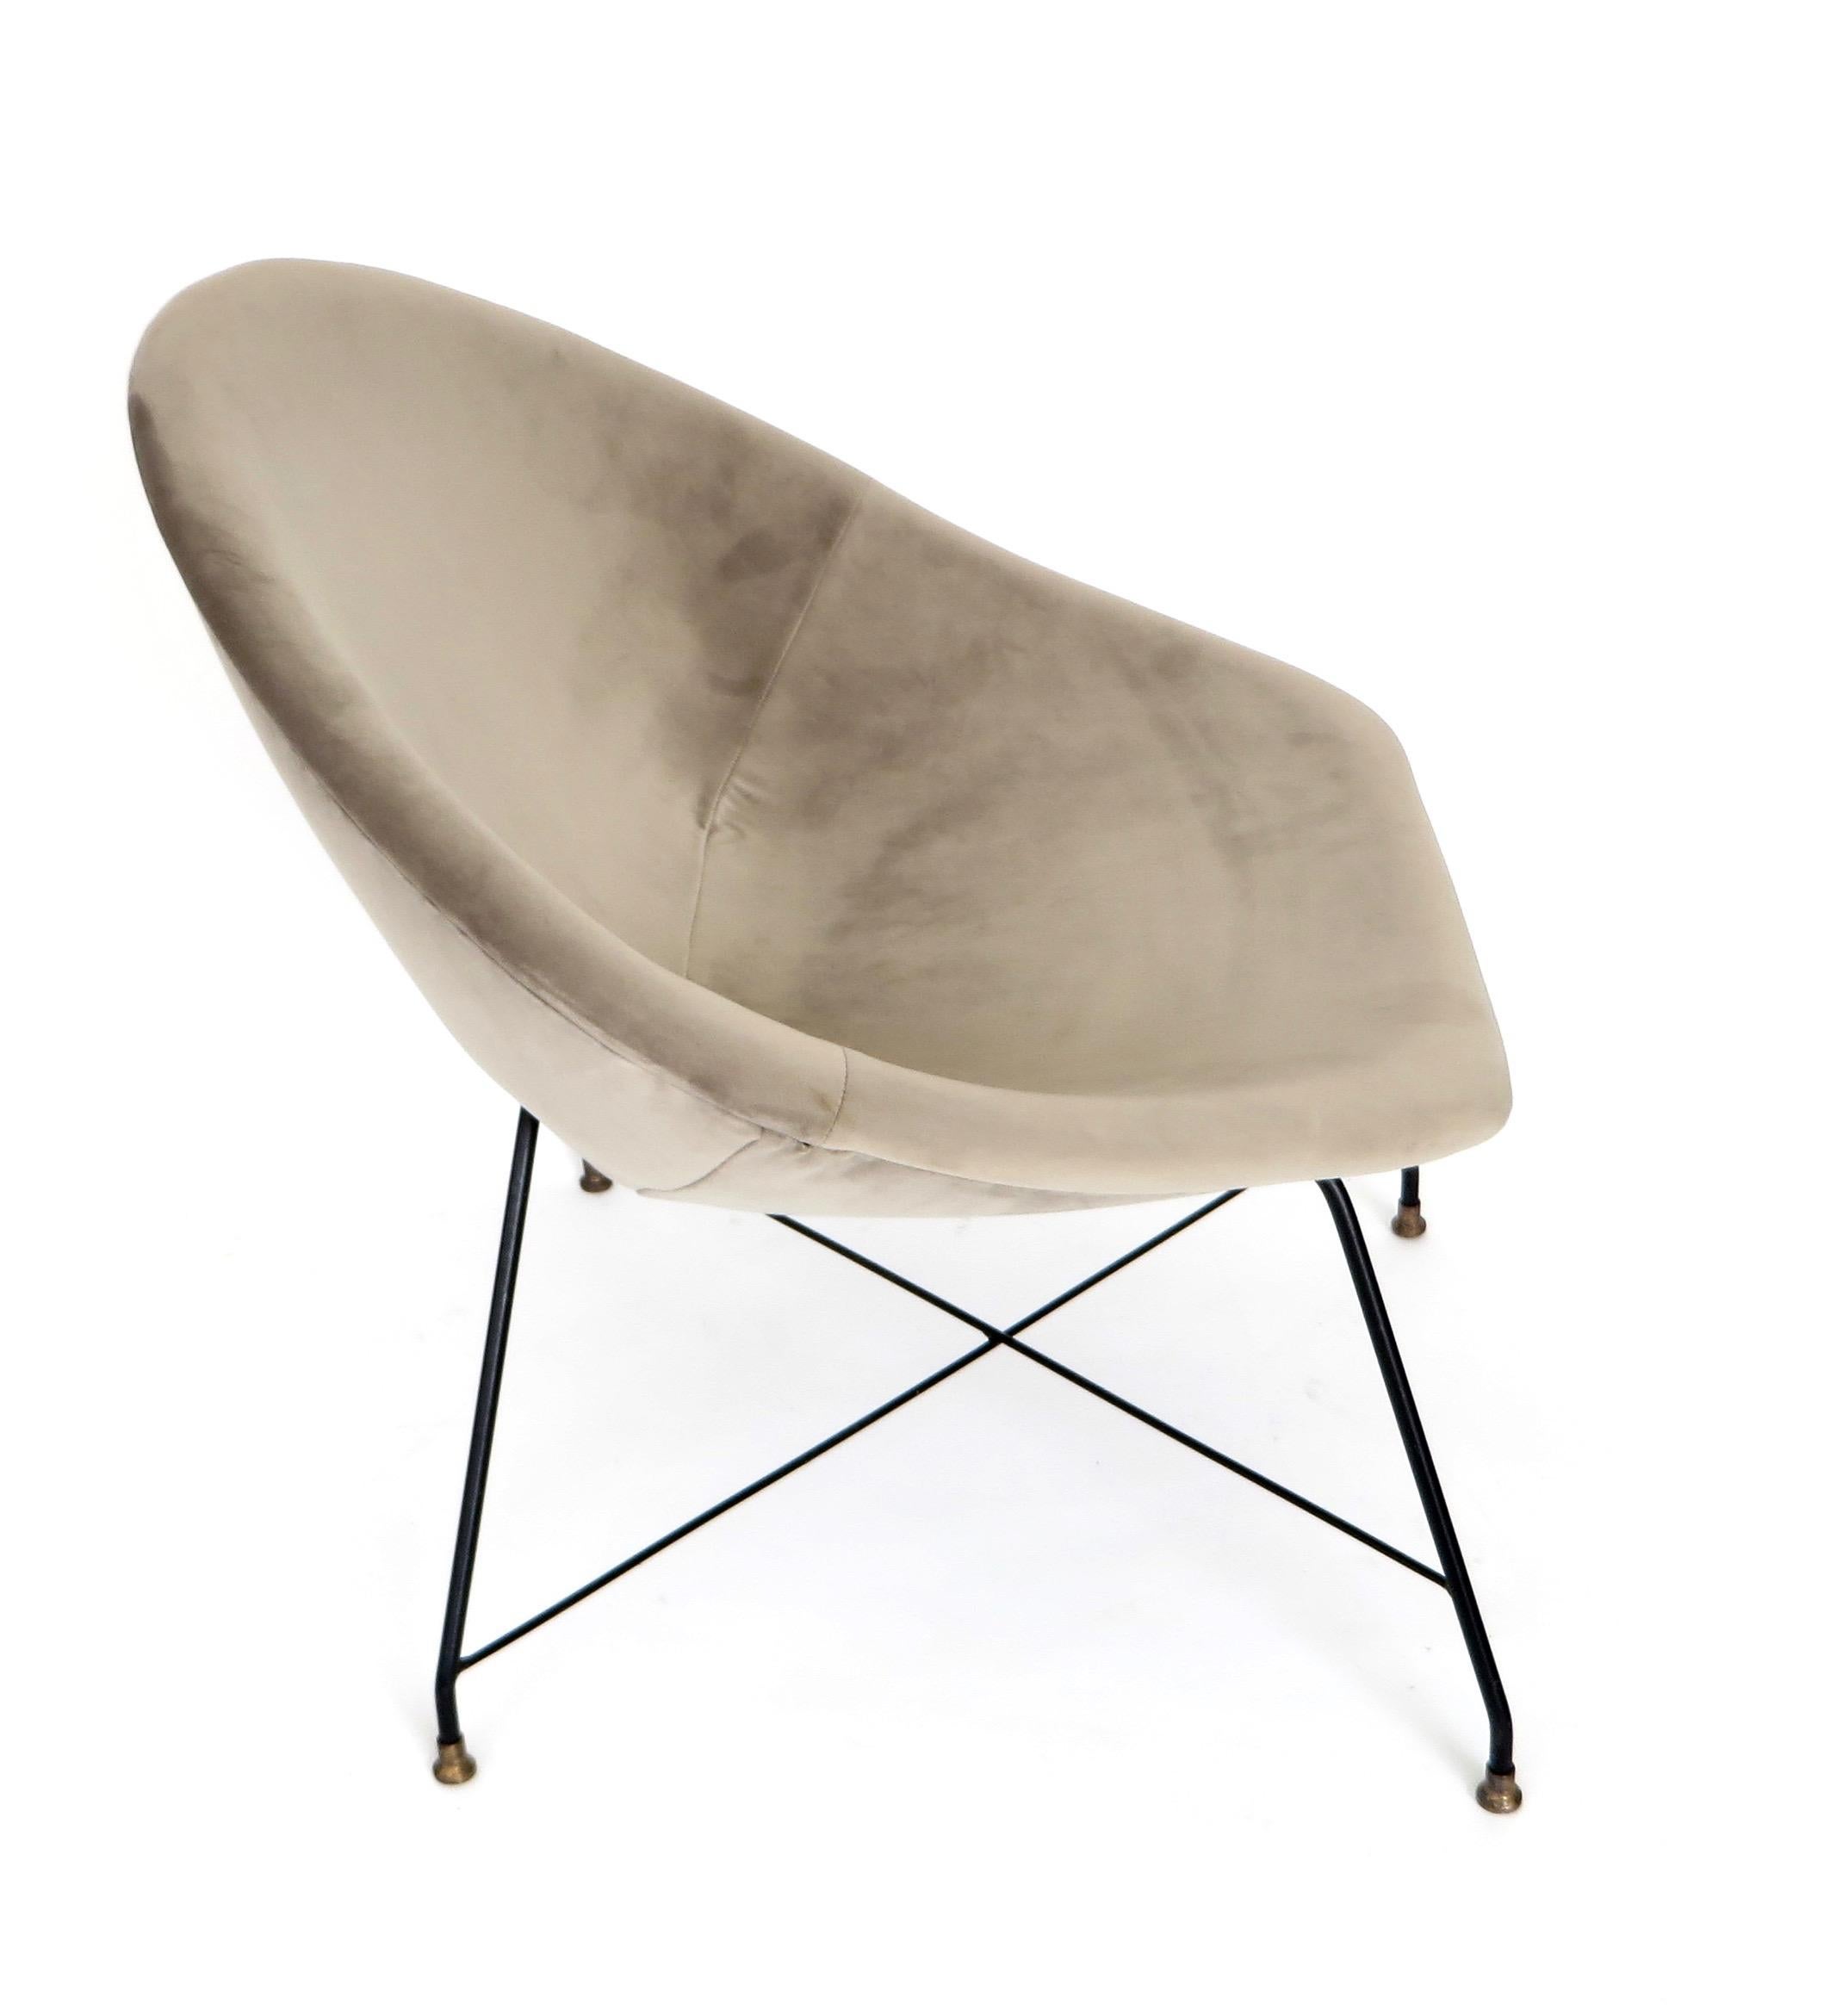 A single lounge chair designed by Augusto Bozzi for Saporiti Italia, Italy, 1954.
This chair has a black lacquered metal wire frame with solid brass feet.
The chair is newly upholstered in a taupe mushroom color velvet and is in excellent